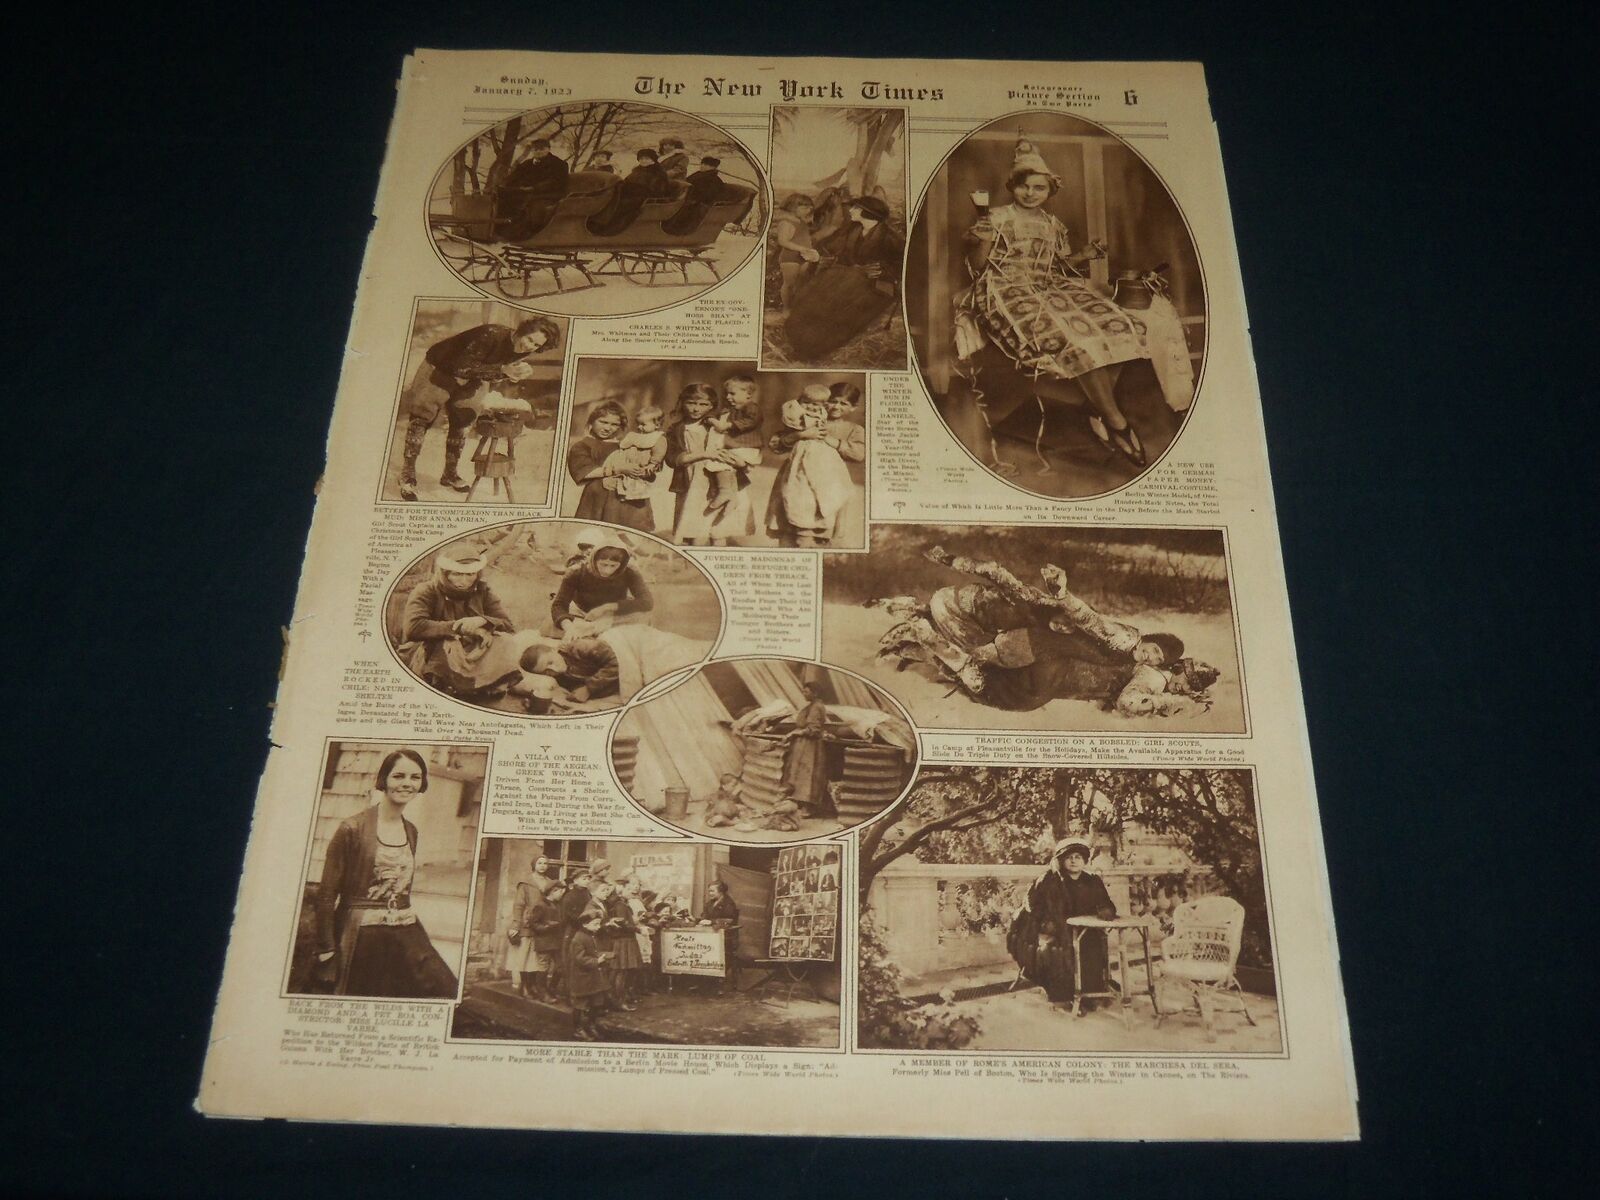 1914 NOVEMBER 15 NEW YORK TIMES ROTO PICTURE SECTION - GREAT PHOTOS - NT 9314